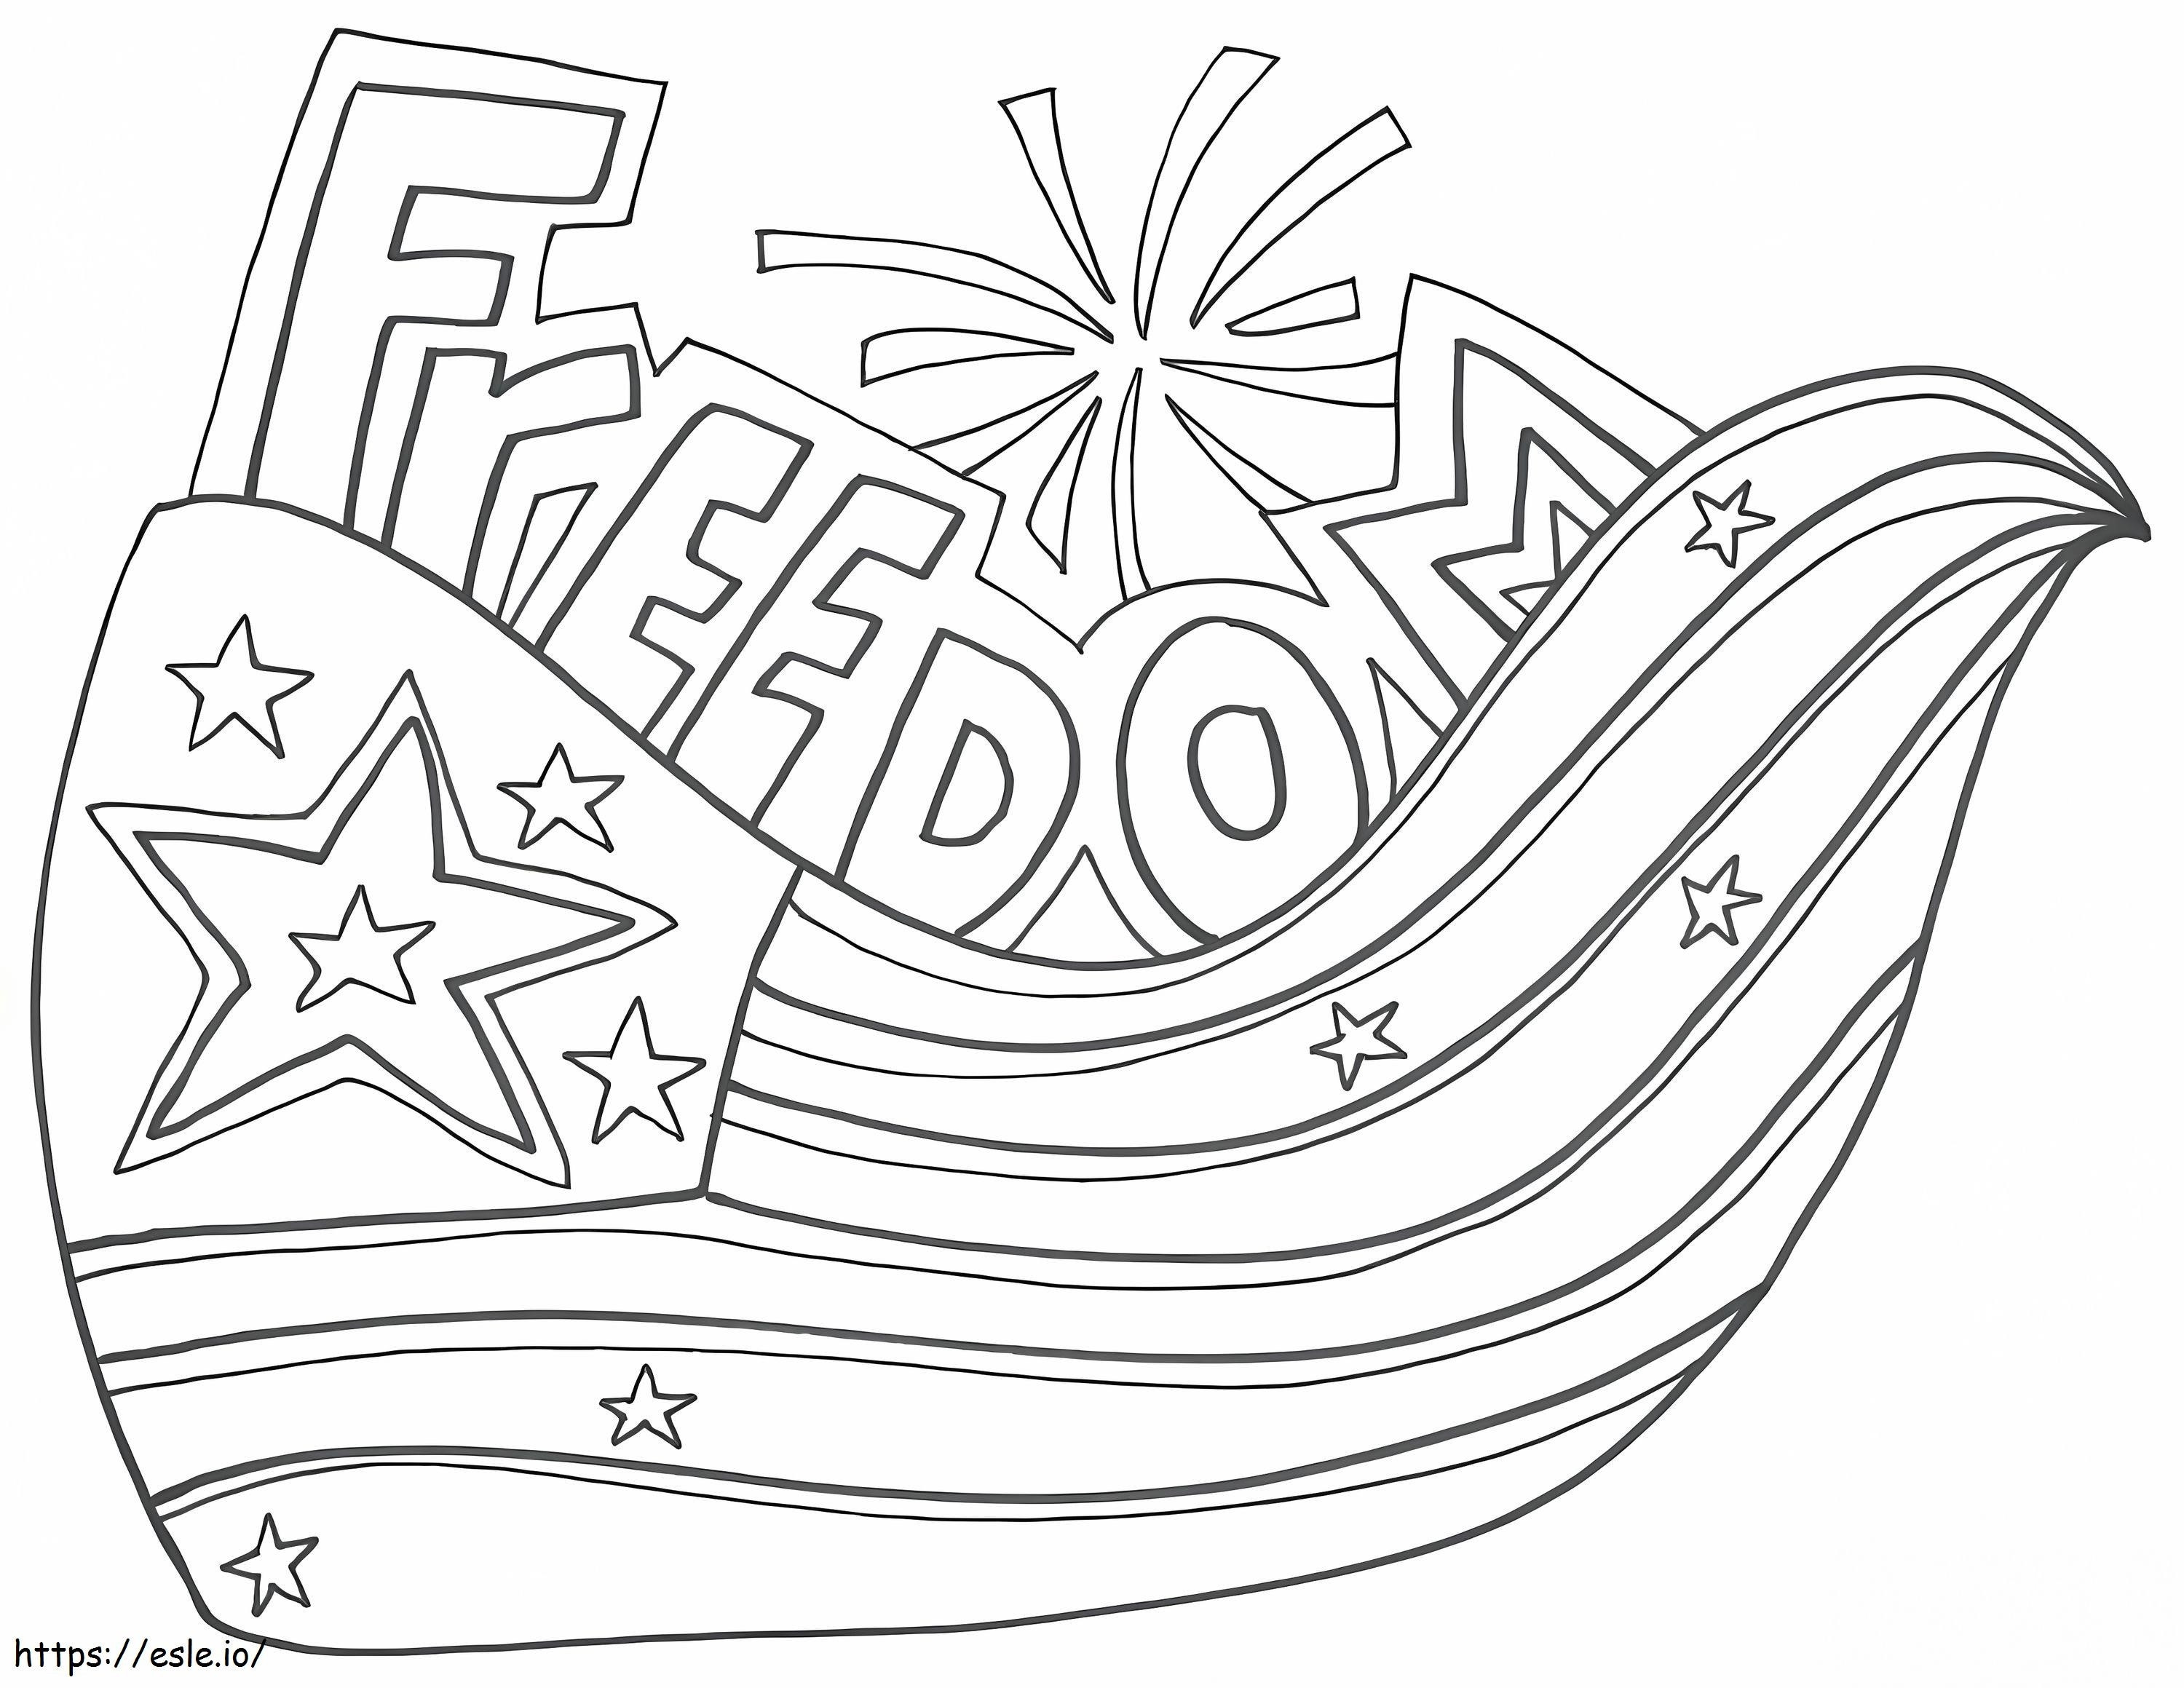 American Independence Day 3 coloring page